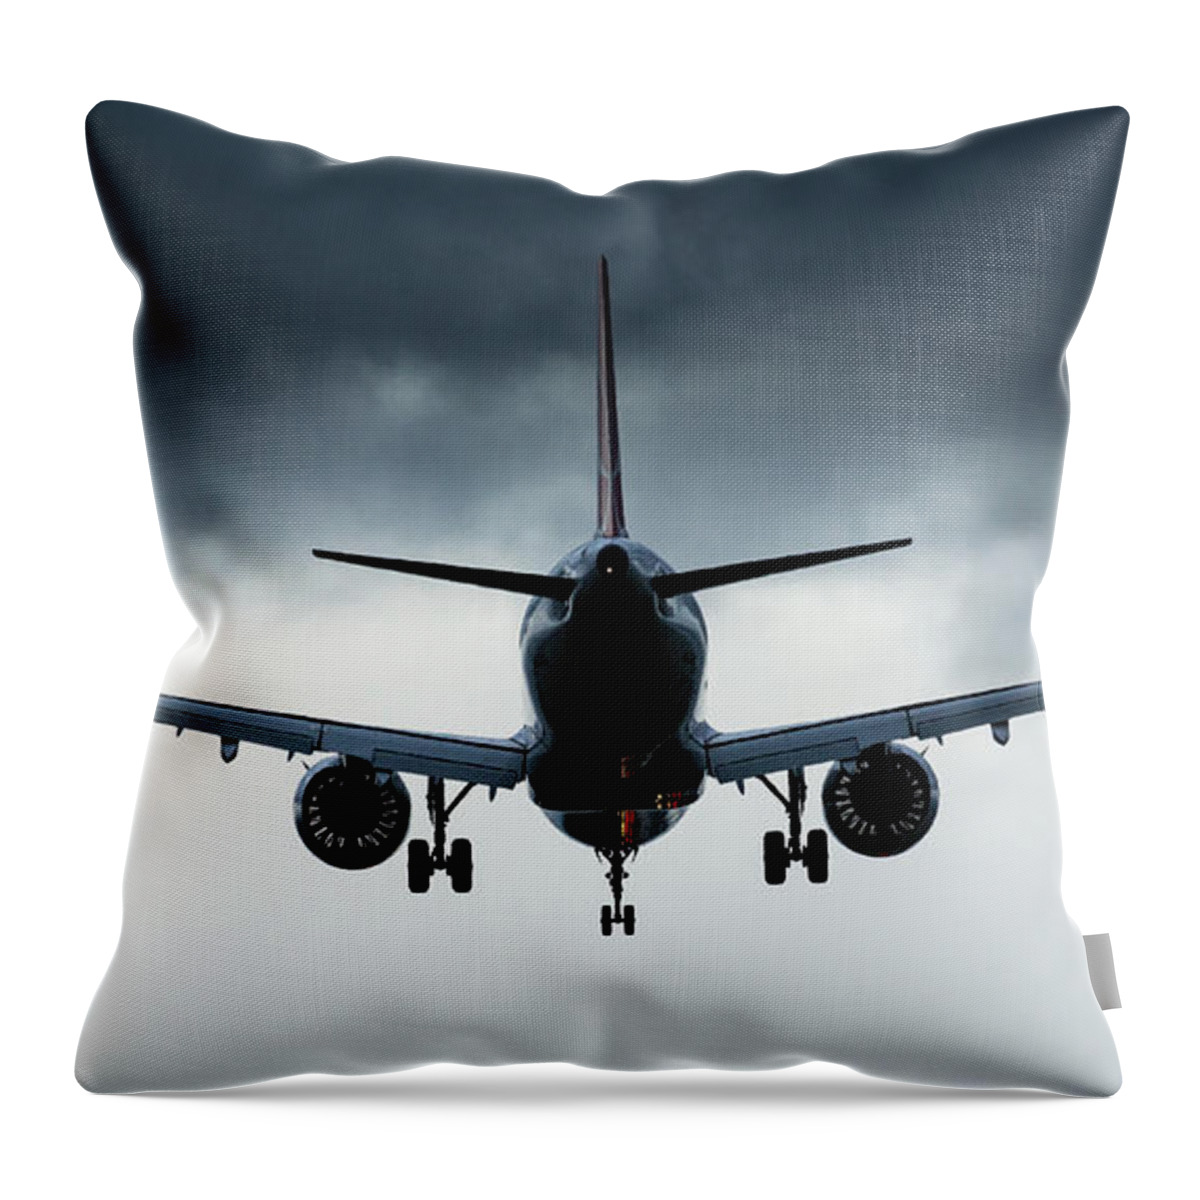 Turkish Airlines Throw Pillow featuring the photograph Turkish Airlines landing at Ljubljana Joze Pucnik Airport by Ian Middleton